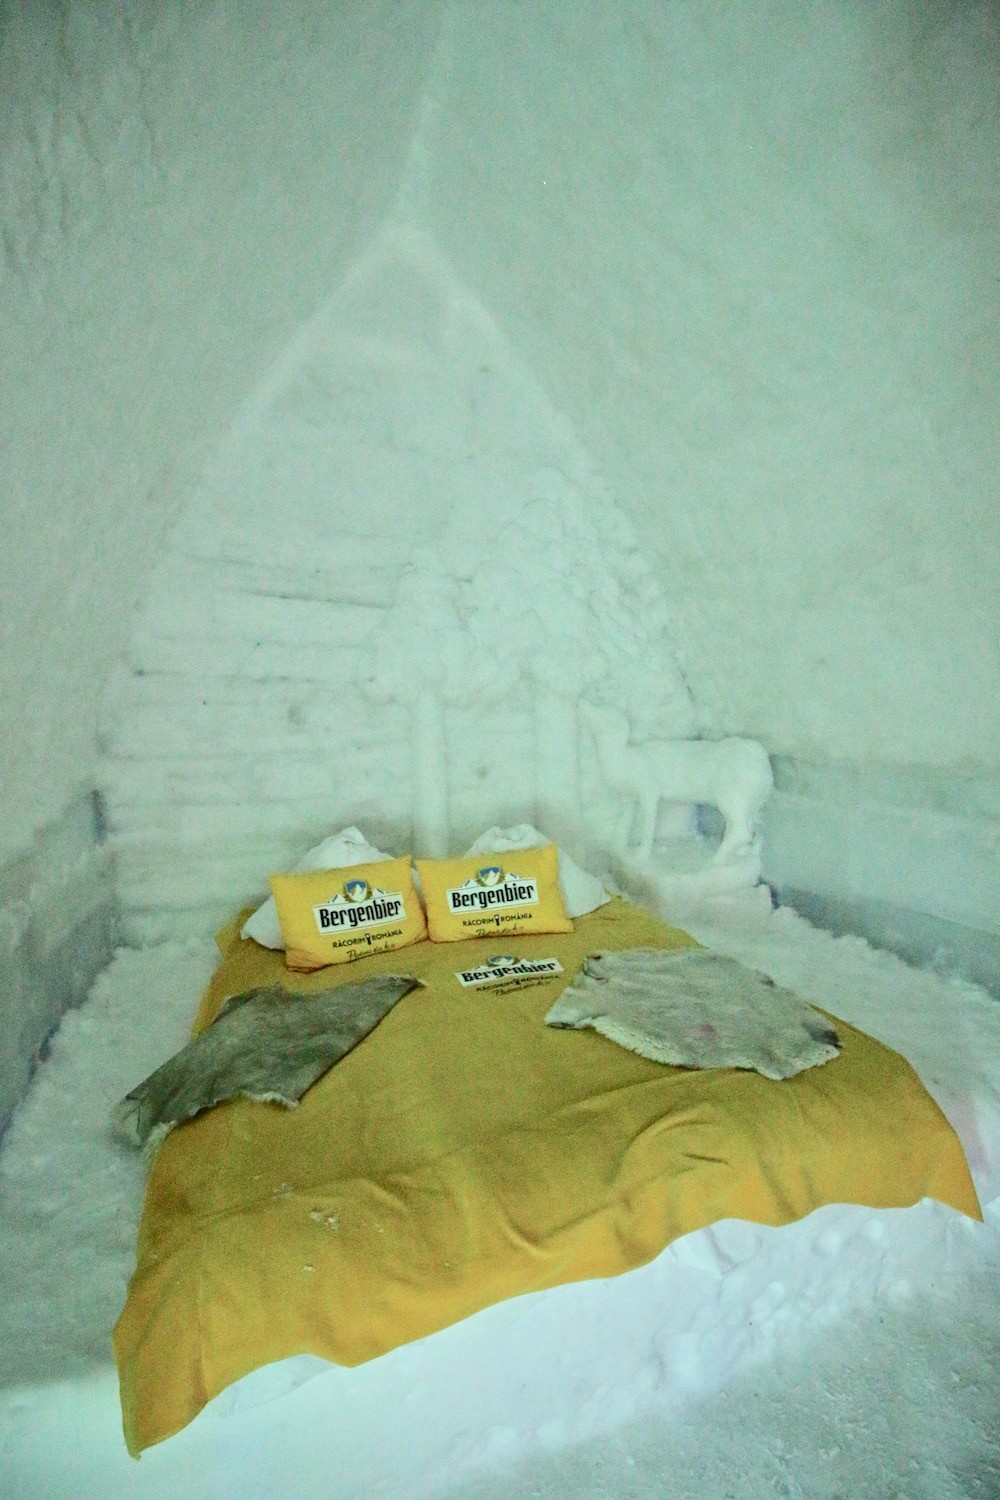 Bed at the Romania Ice Hotel